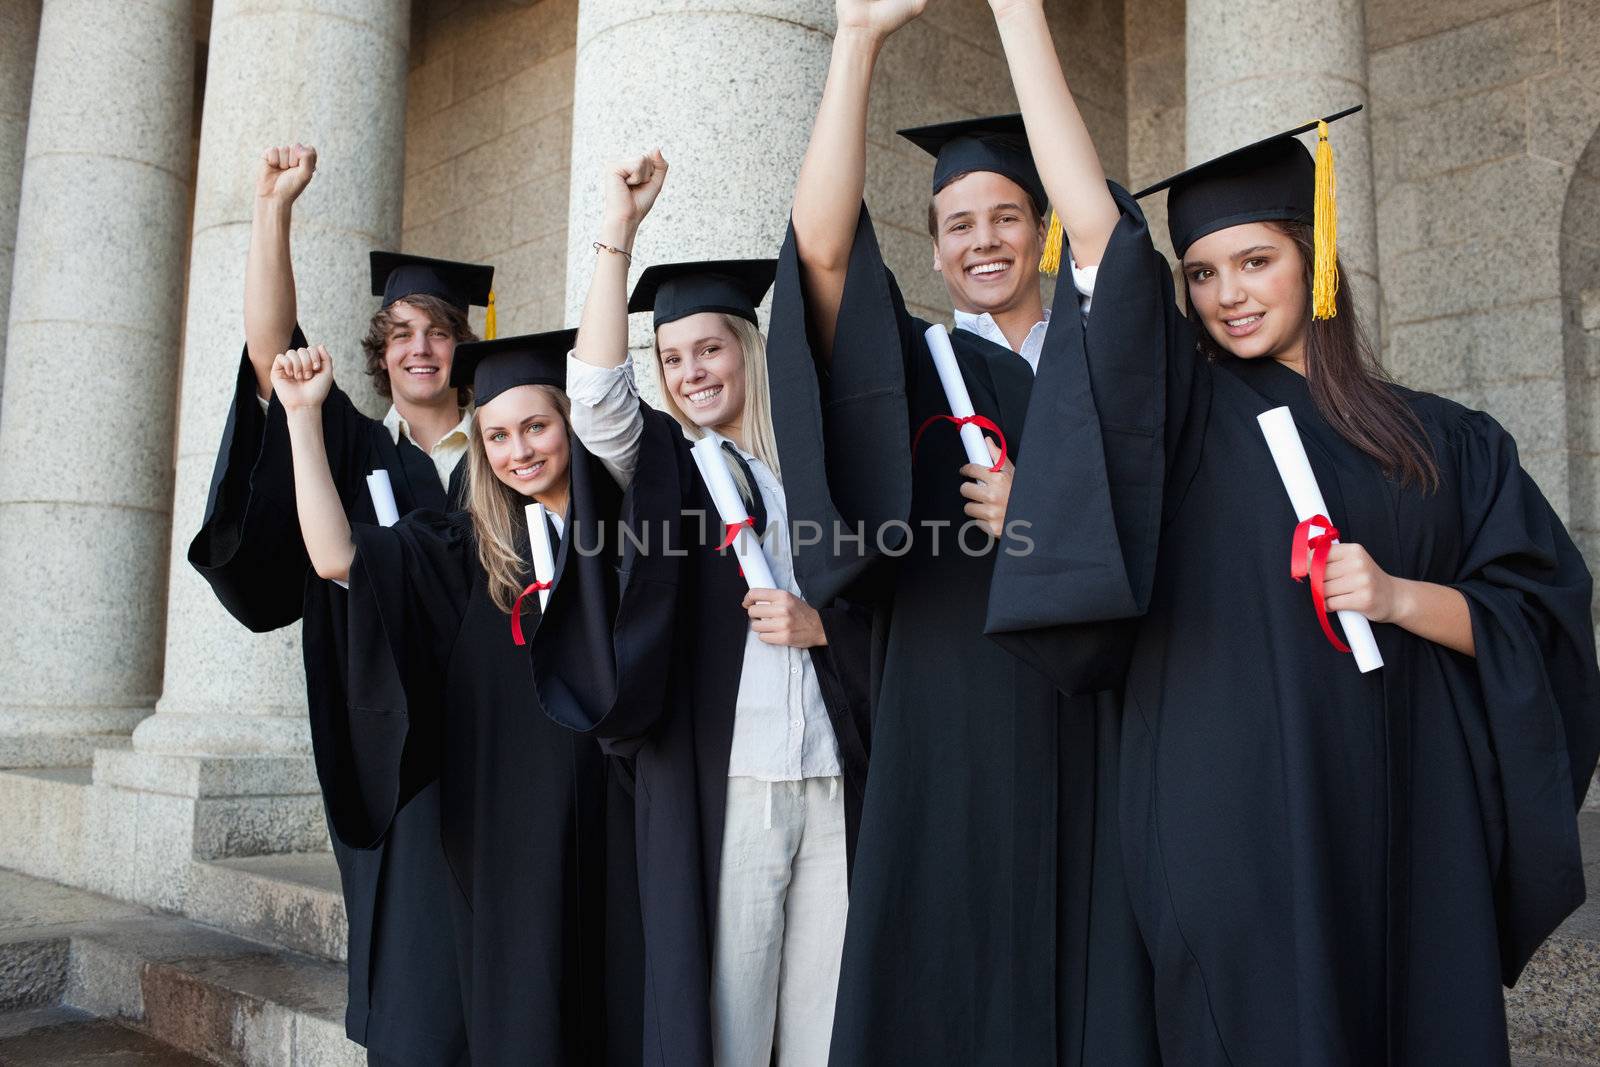 Five happy graduates posing the arm raised in front of the university